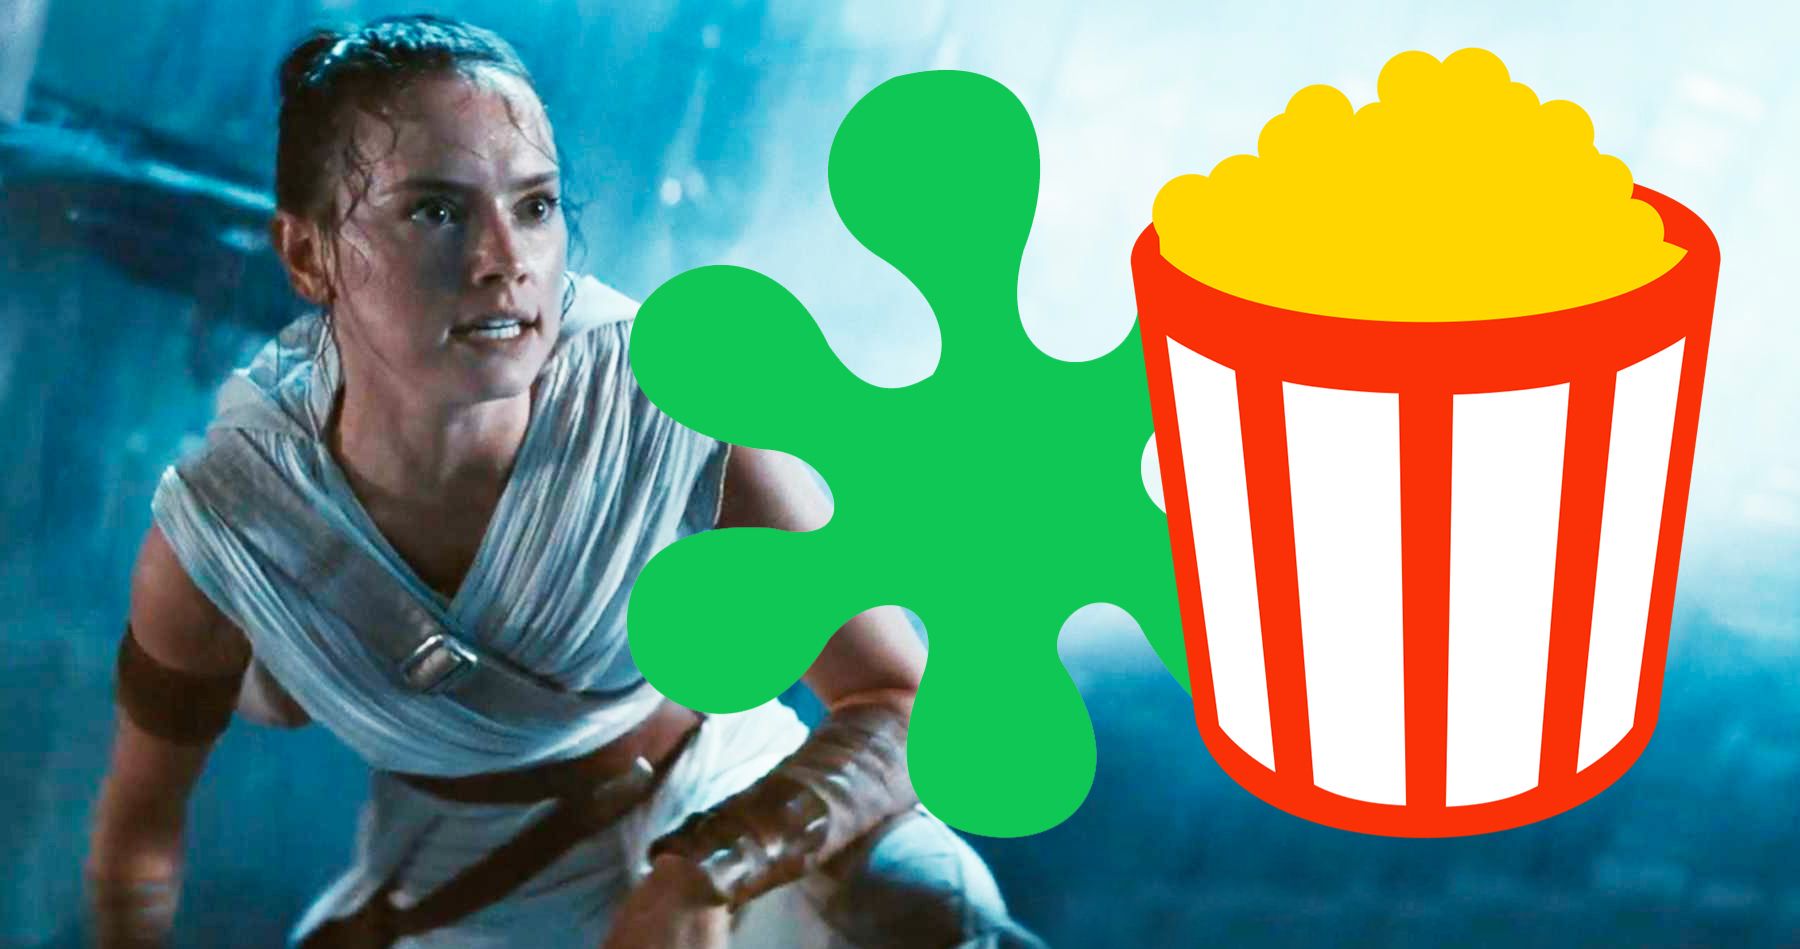 Rotten Tomato Audience Score for Rise of Skywalker remains at 86